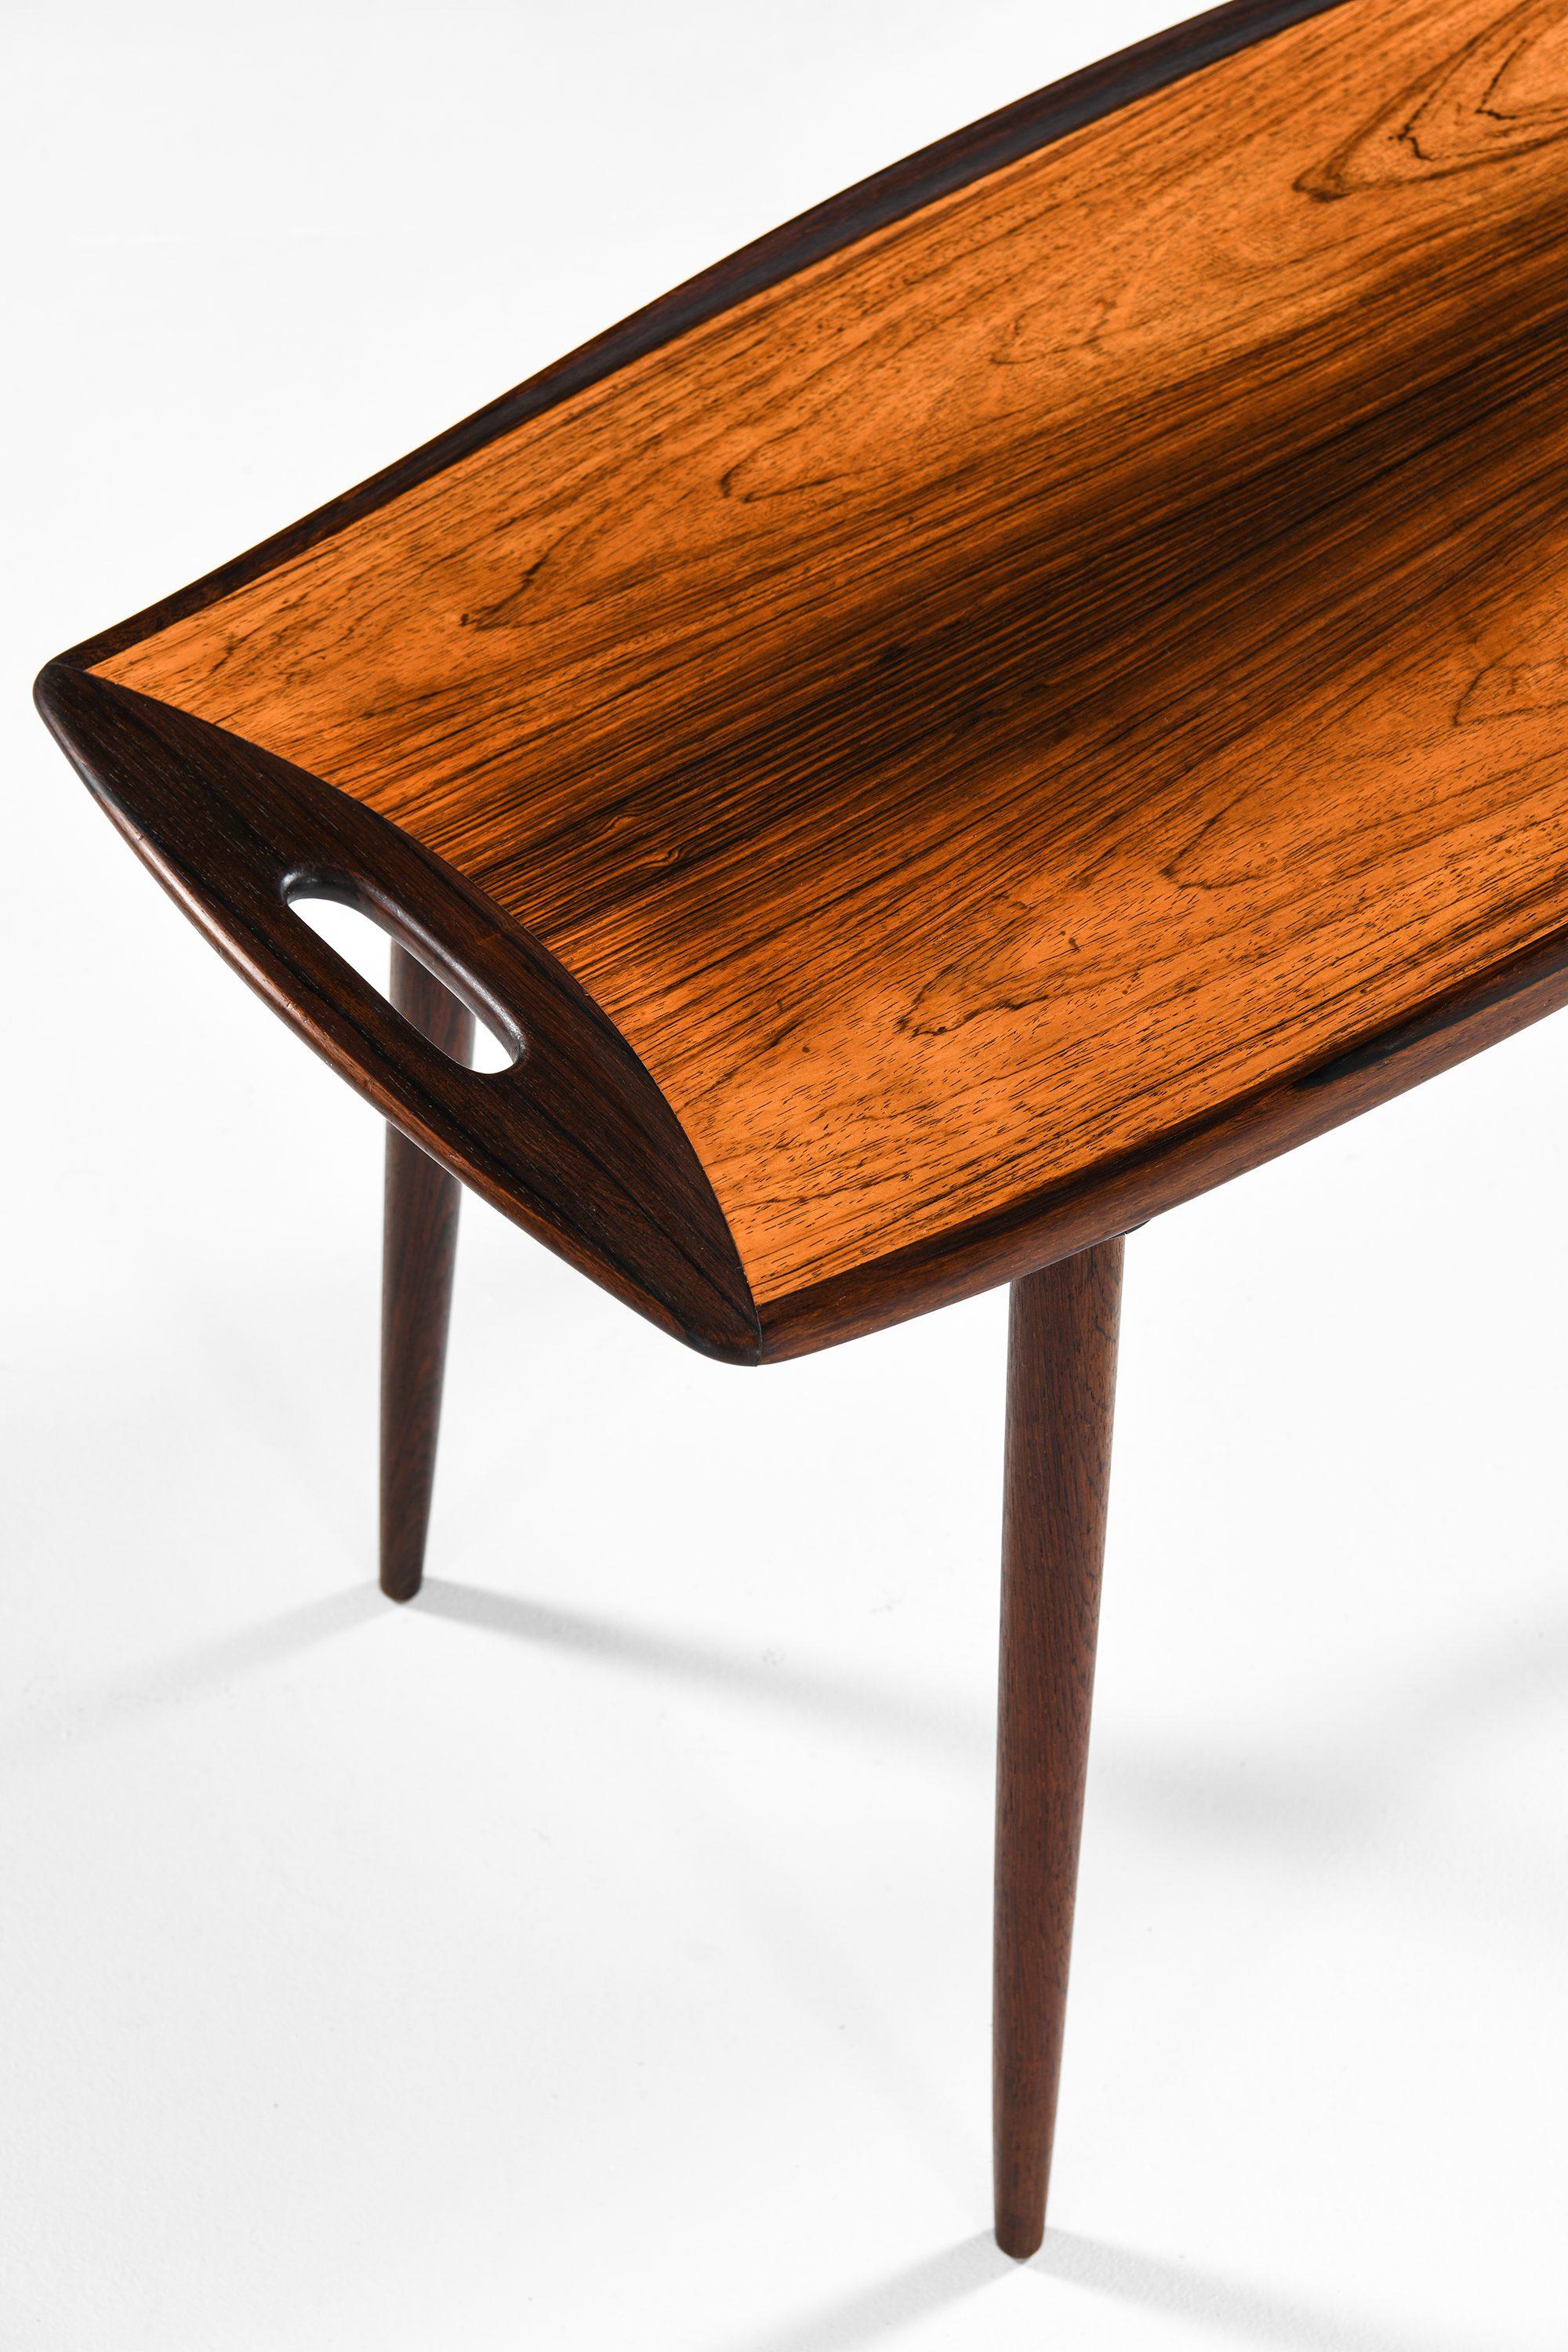 20th Century Nesting Tables in Rosewood by Jens Quistgaard, 1964 For Sale